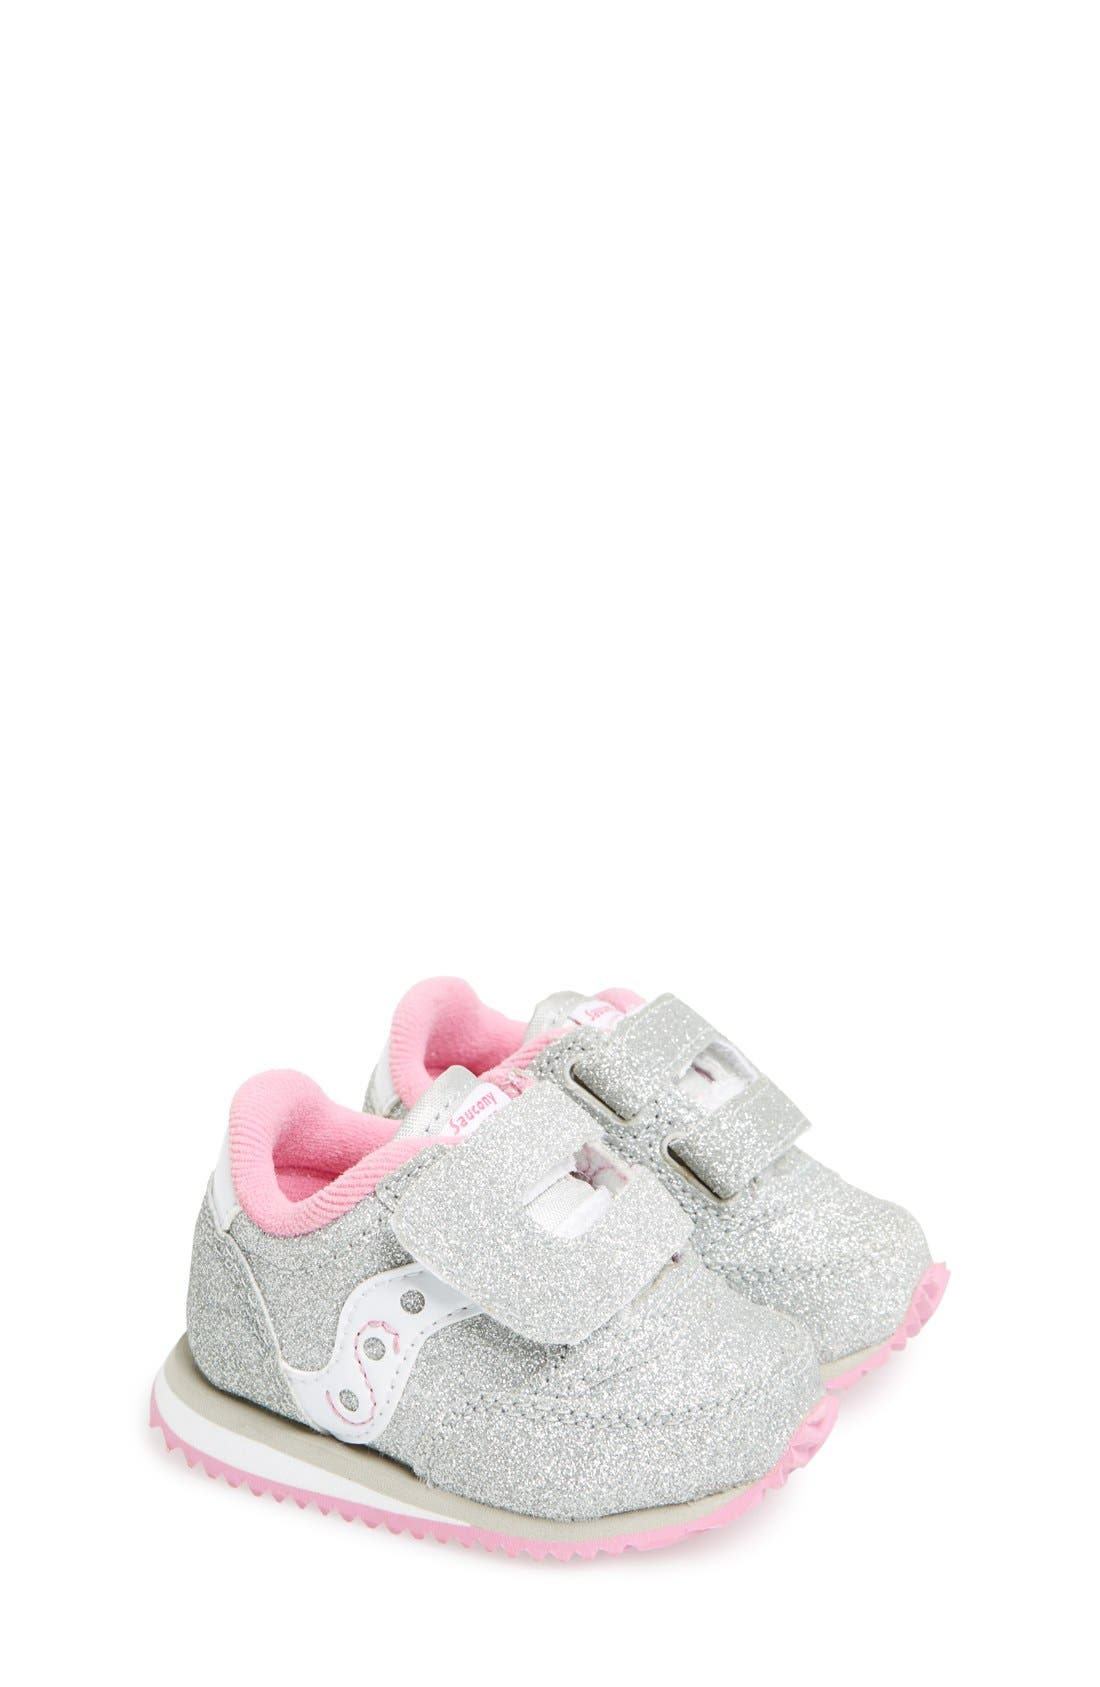 saucony baby shoes review